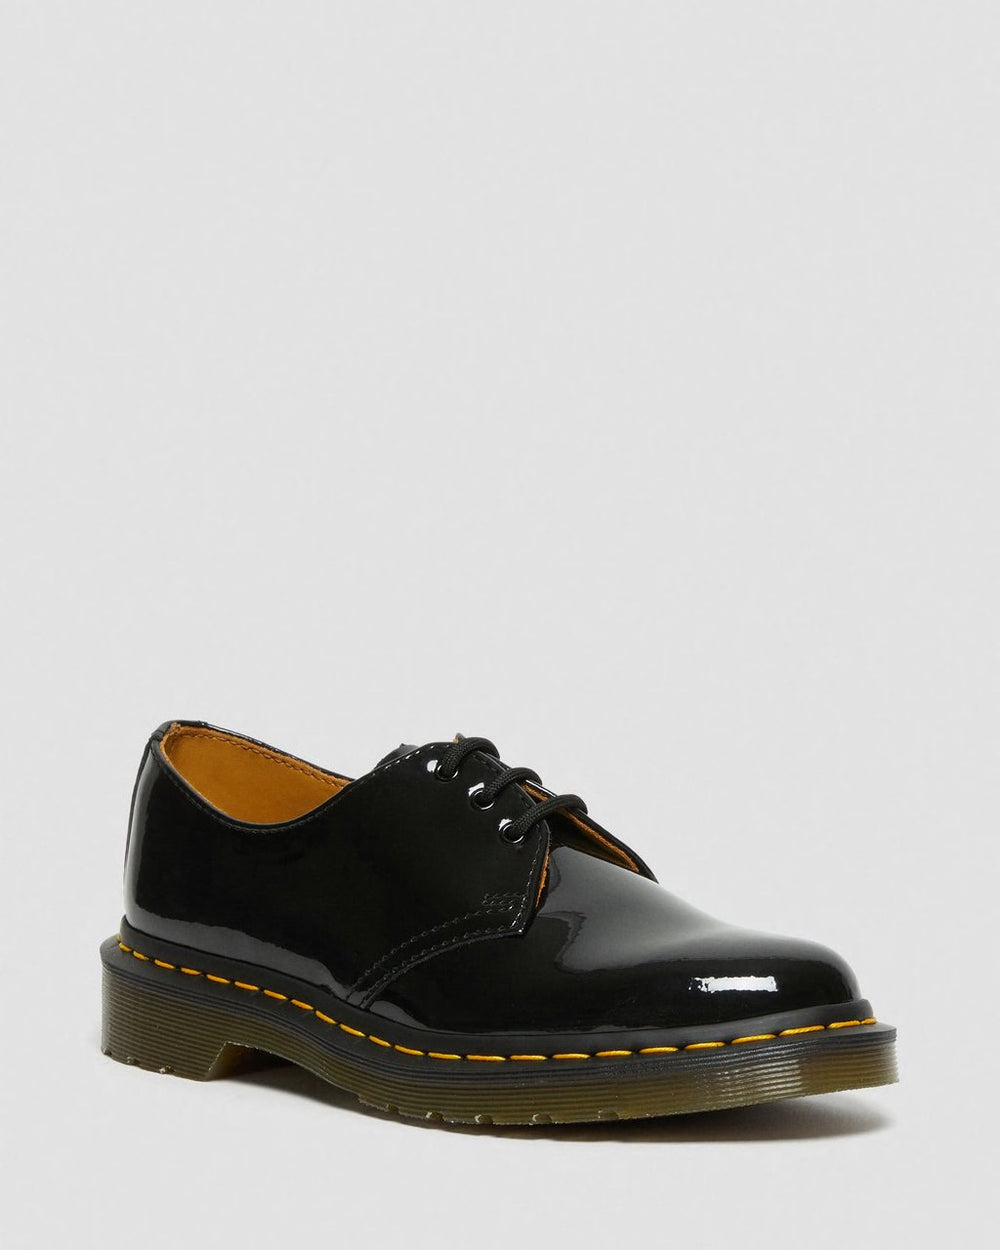 Dr. Martens 1461 Women's Patent Leather Oxford Shoes